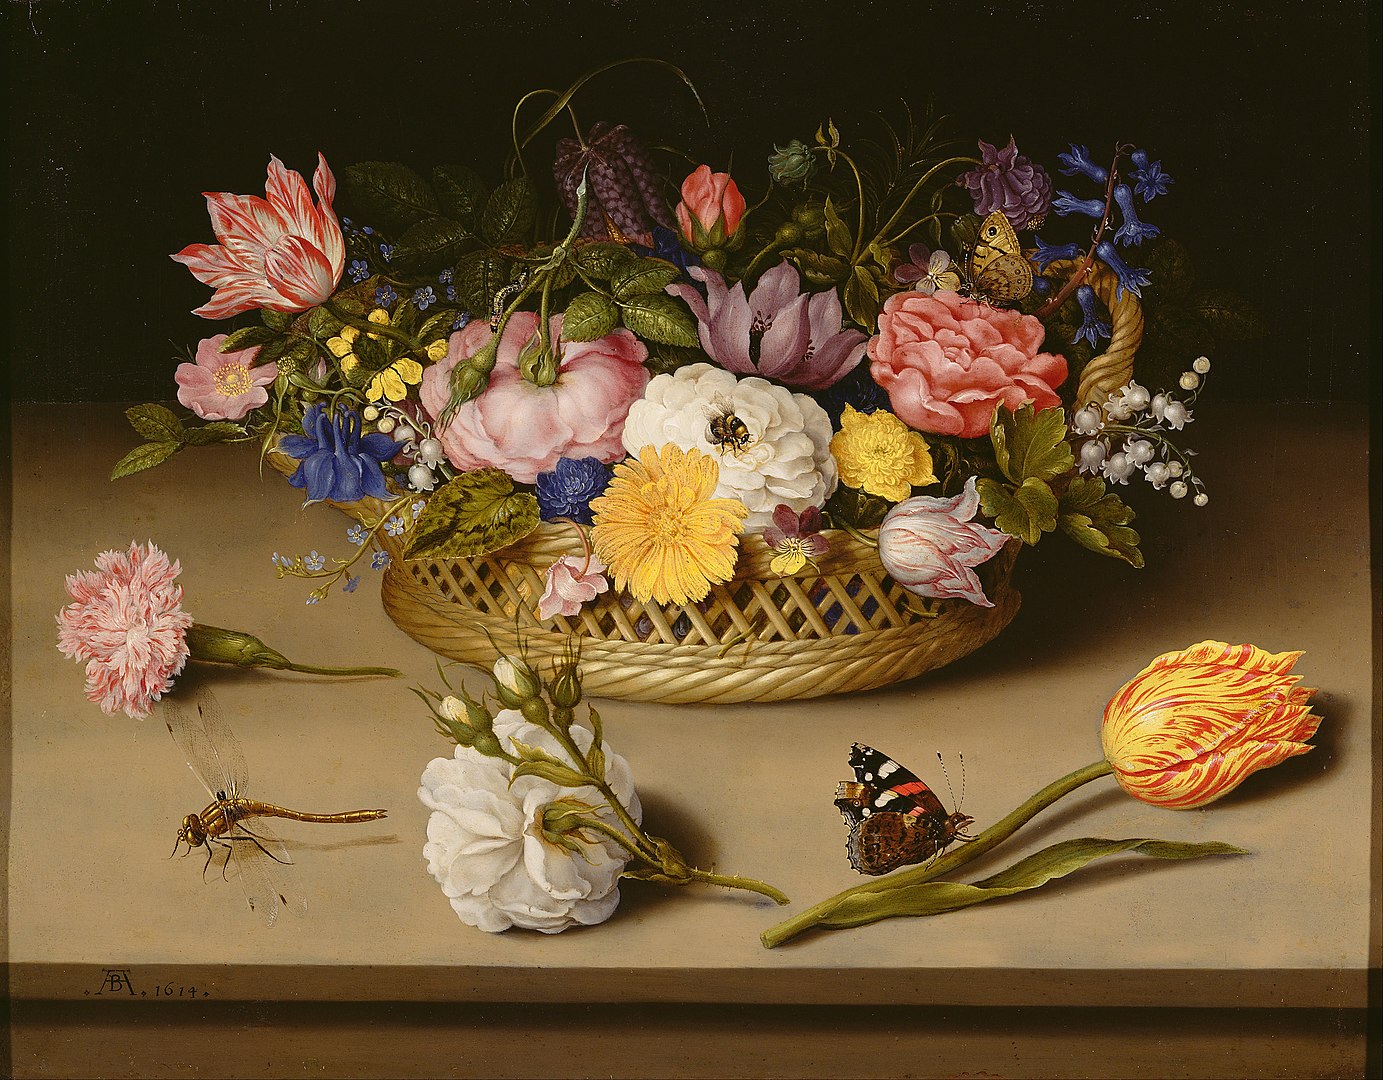 A basket of flowers on a table with insects